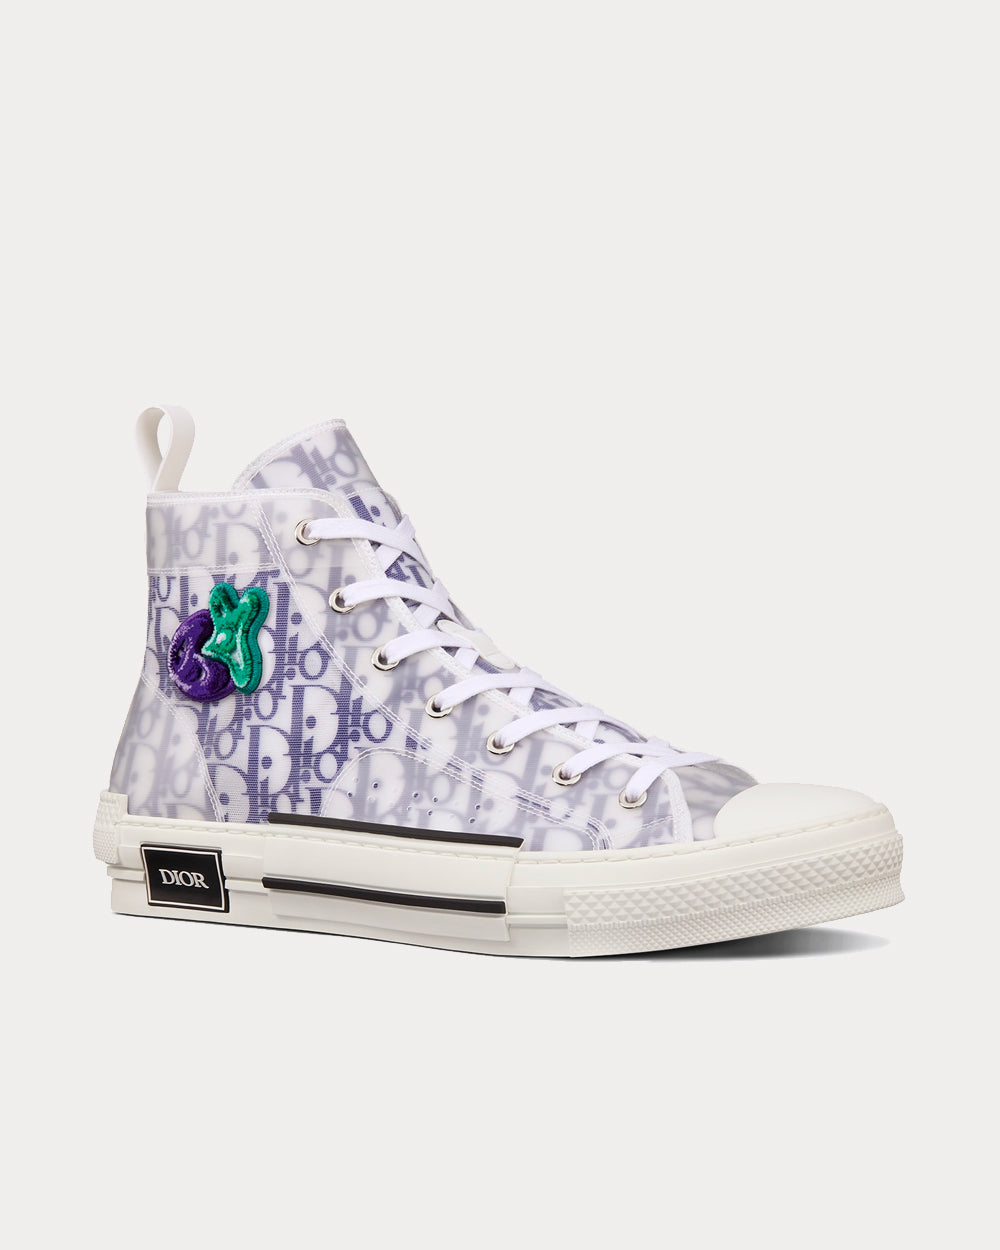 Dior x Kenny Scharf B23 White and Purple Dior Oblique Canvas with 